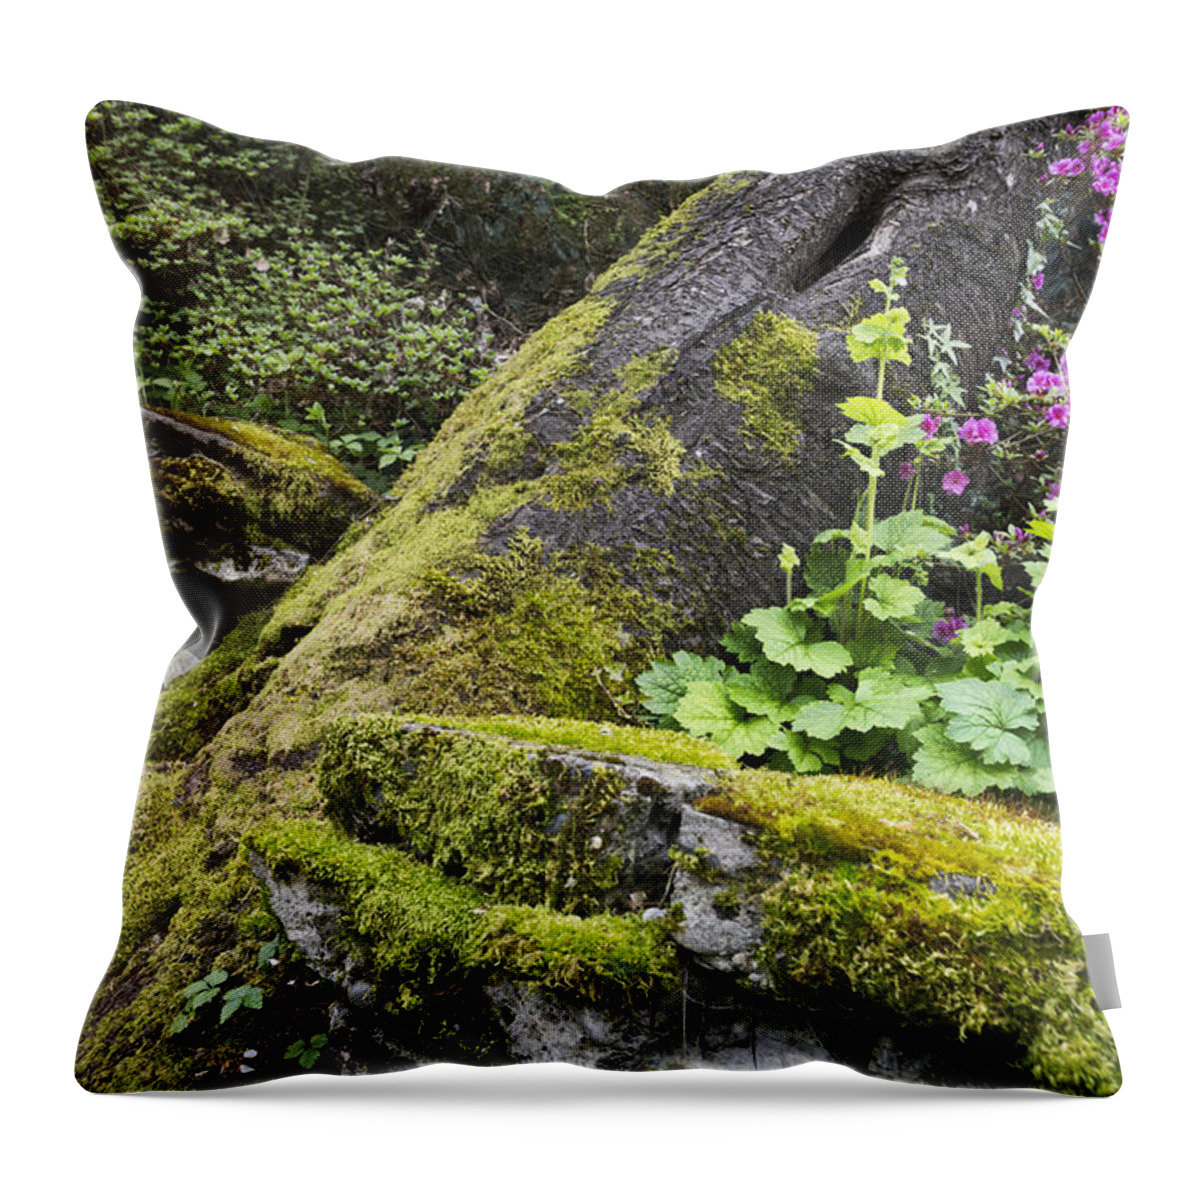 Nature Throw Pillow featuring the photograph Along The Pathway by Priya Ghose